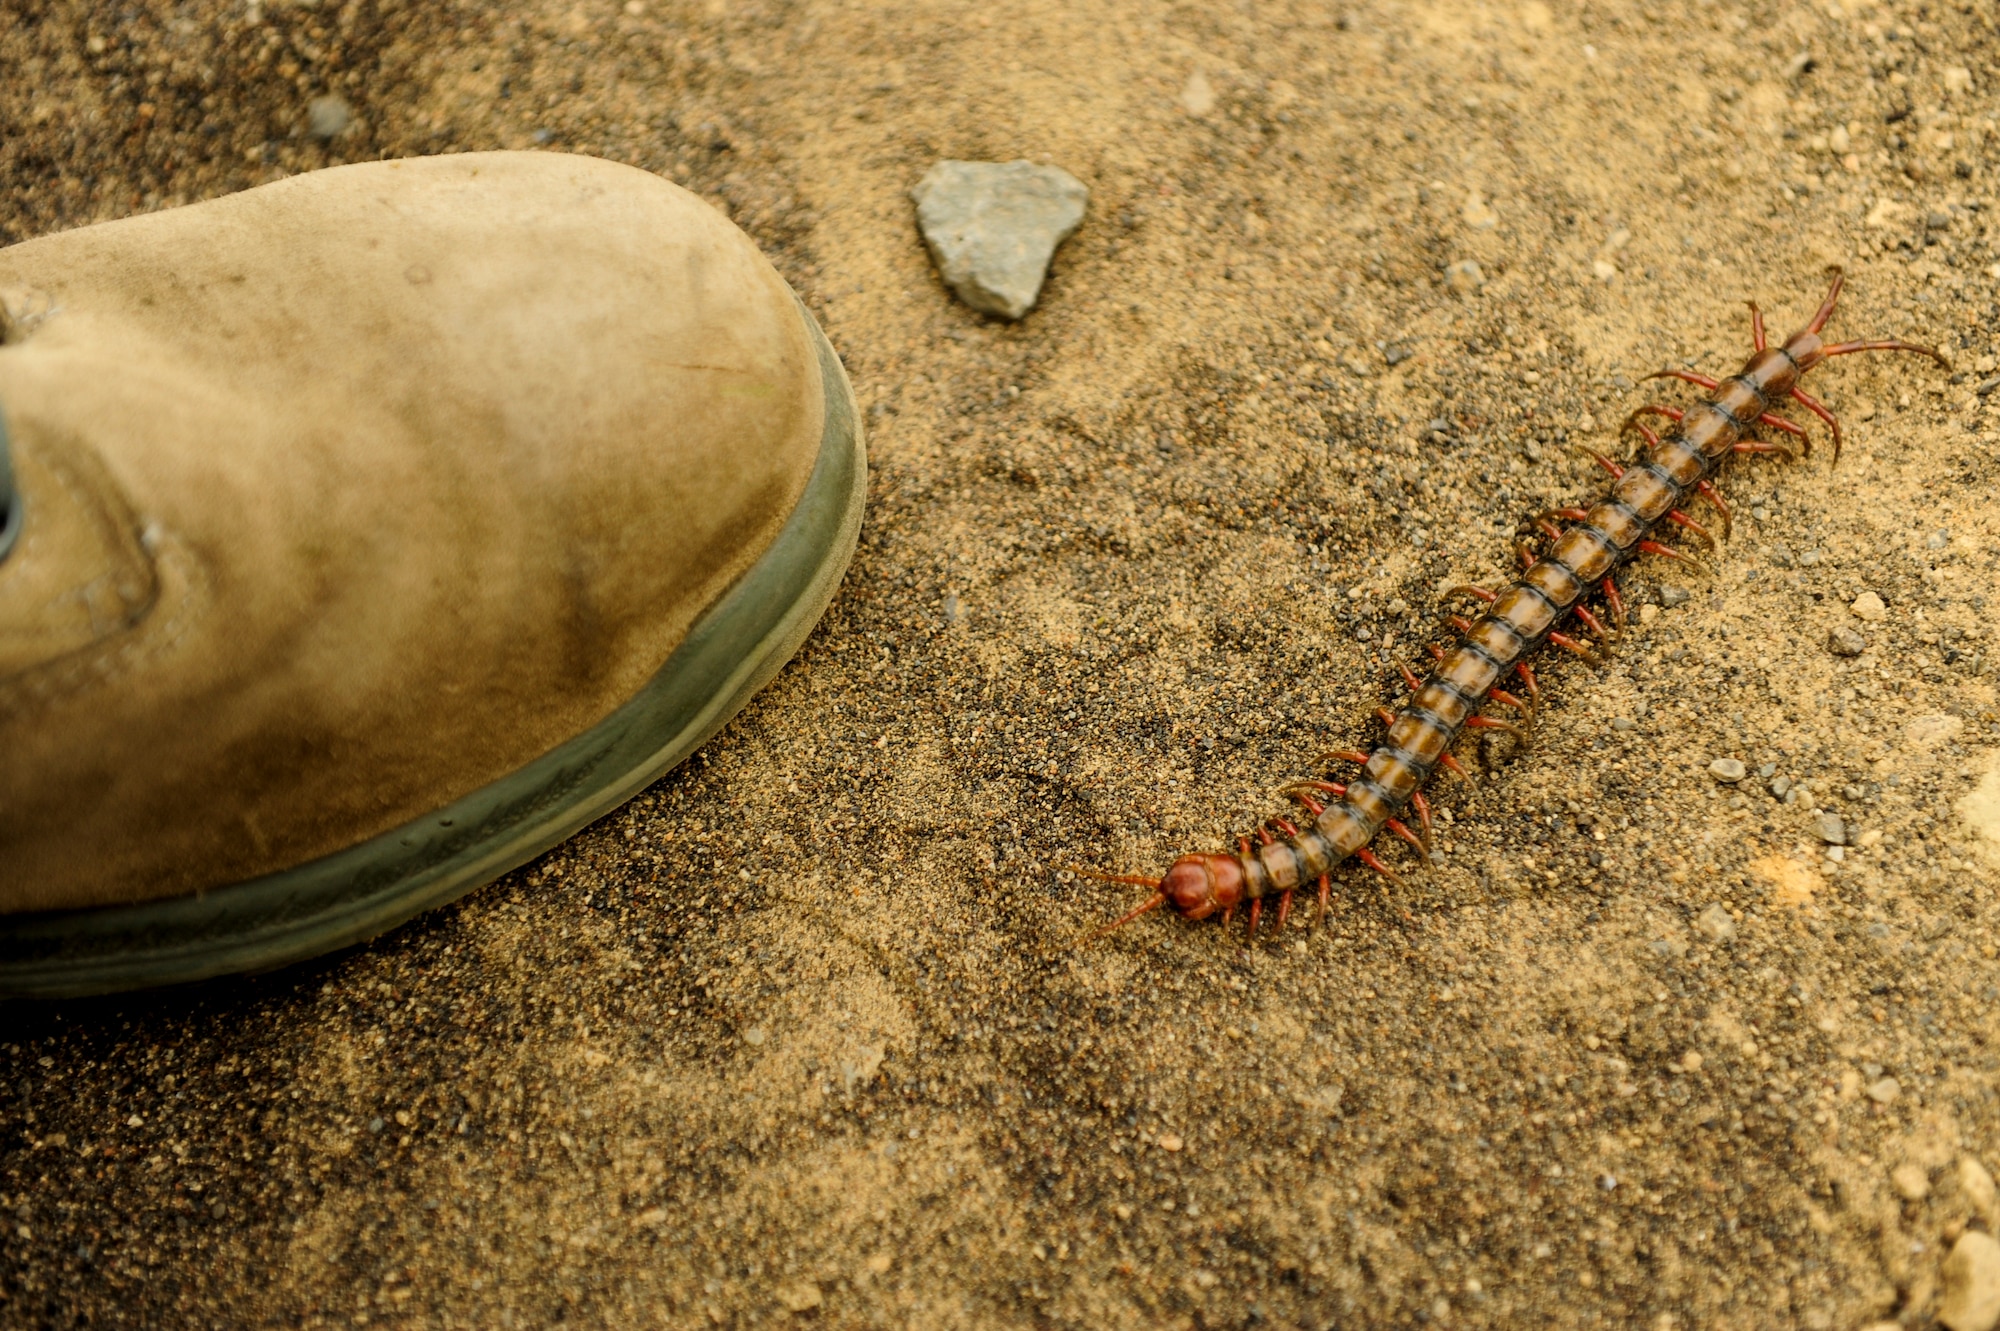 A centipede crawls near the boot of an Airman Jan. 8, 2015, on Iwo To, Japan. These venomous insects were just one of many hardships troops had to endure during the battle of Iwo Jima, along with rugged terrain, short supplies and a poor water supply. (U.S. Air Force photo by Airman 1st Class John Linzmeier)